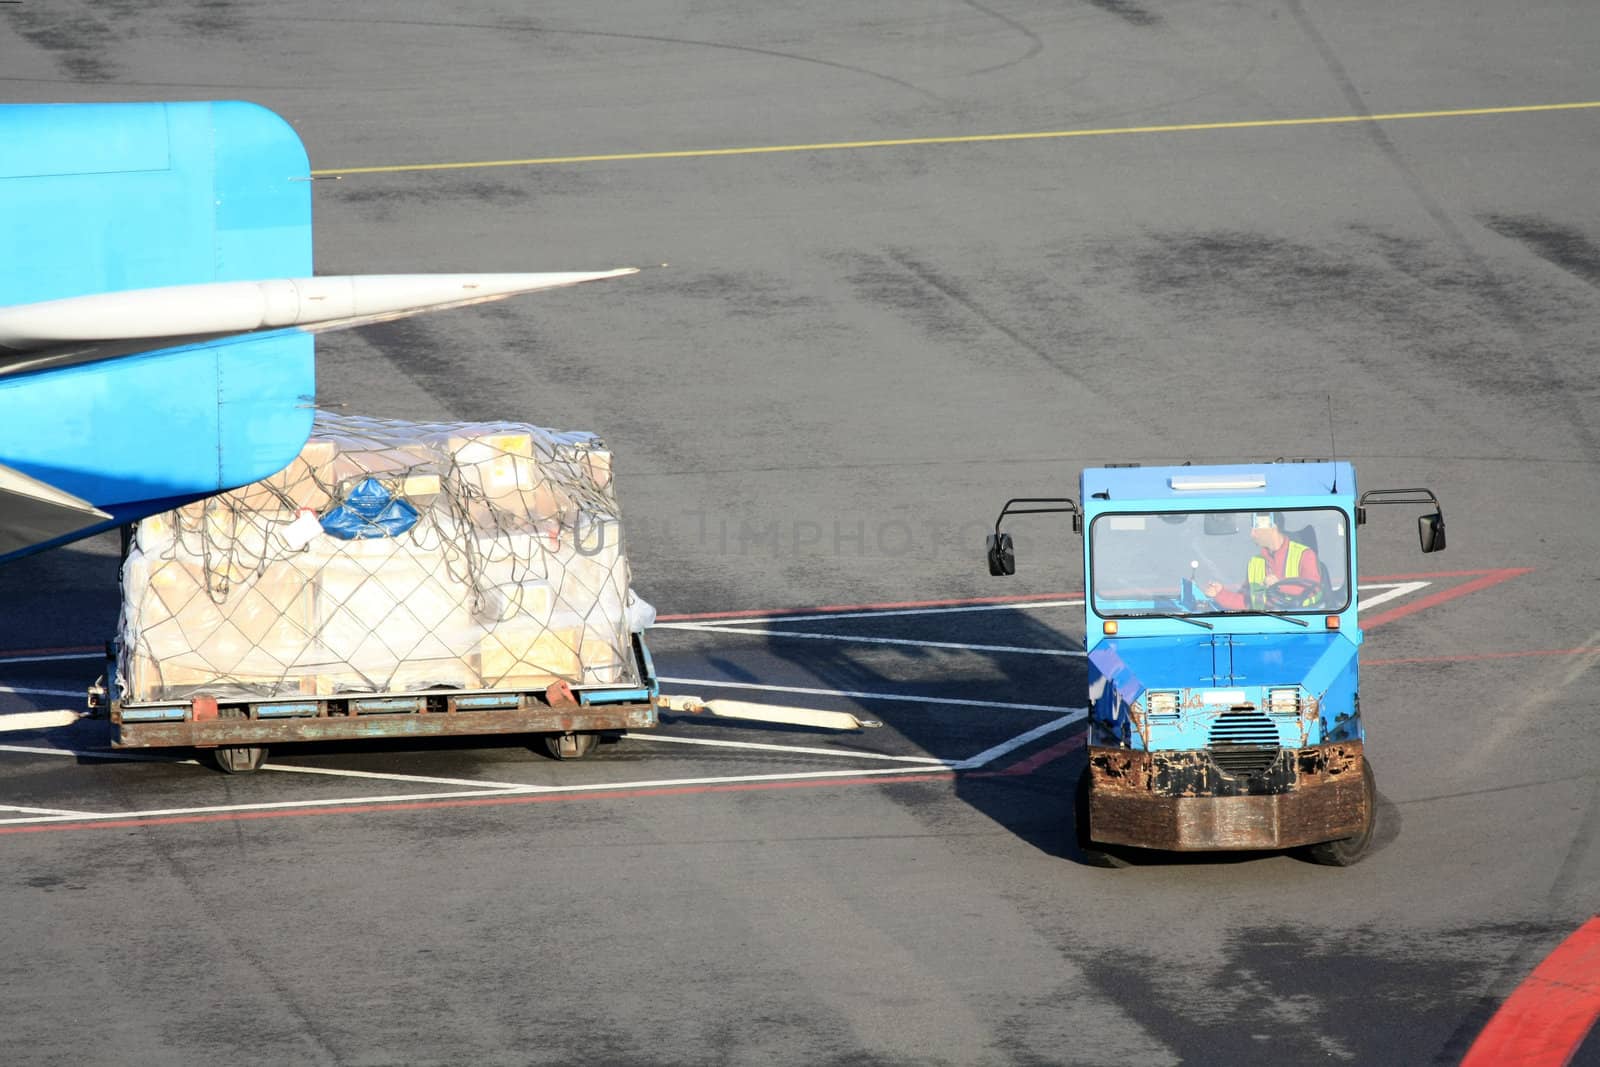 Cargo trailer near a plane at the airport